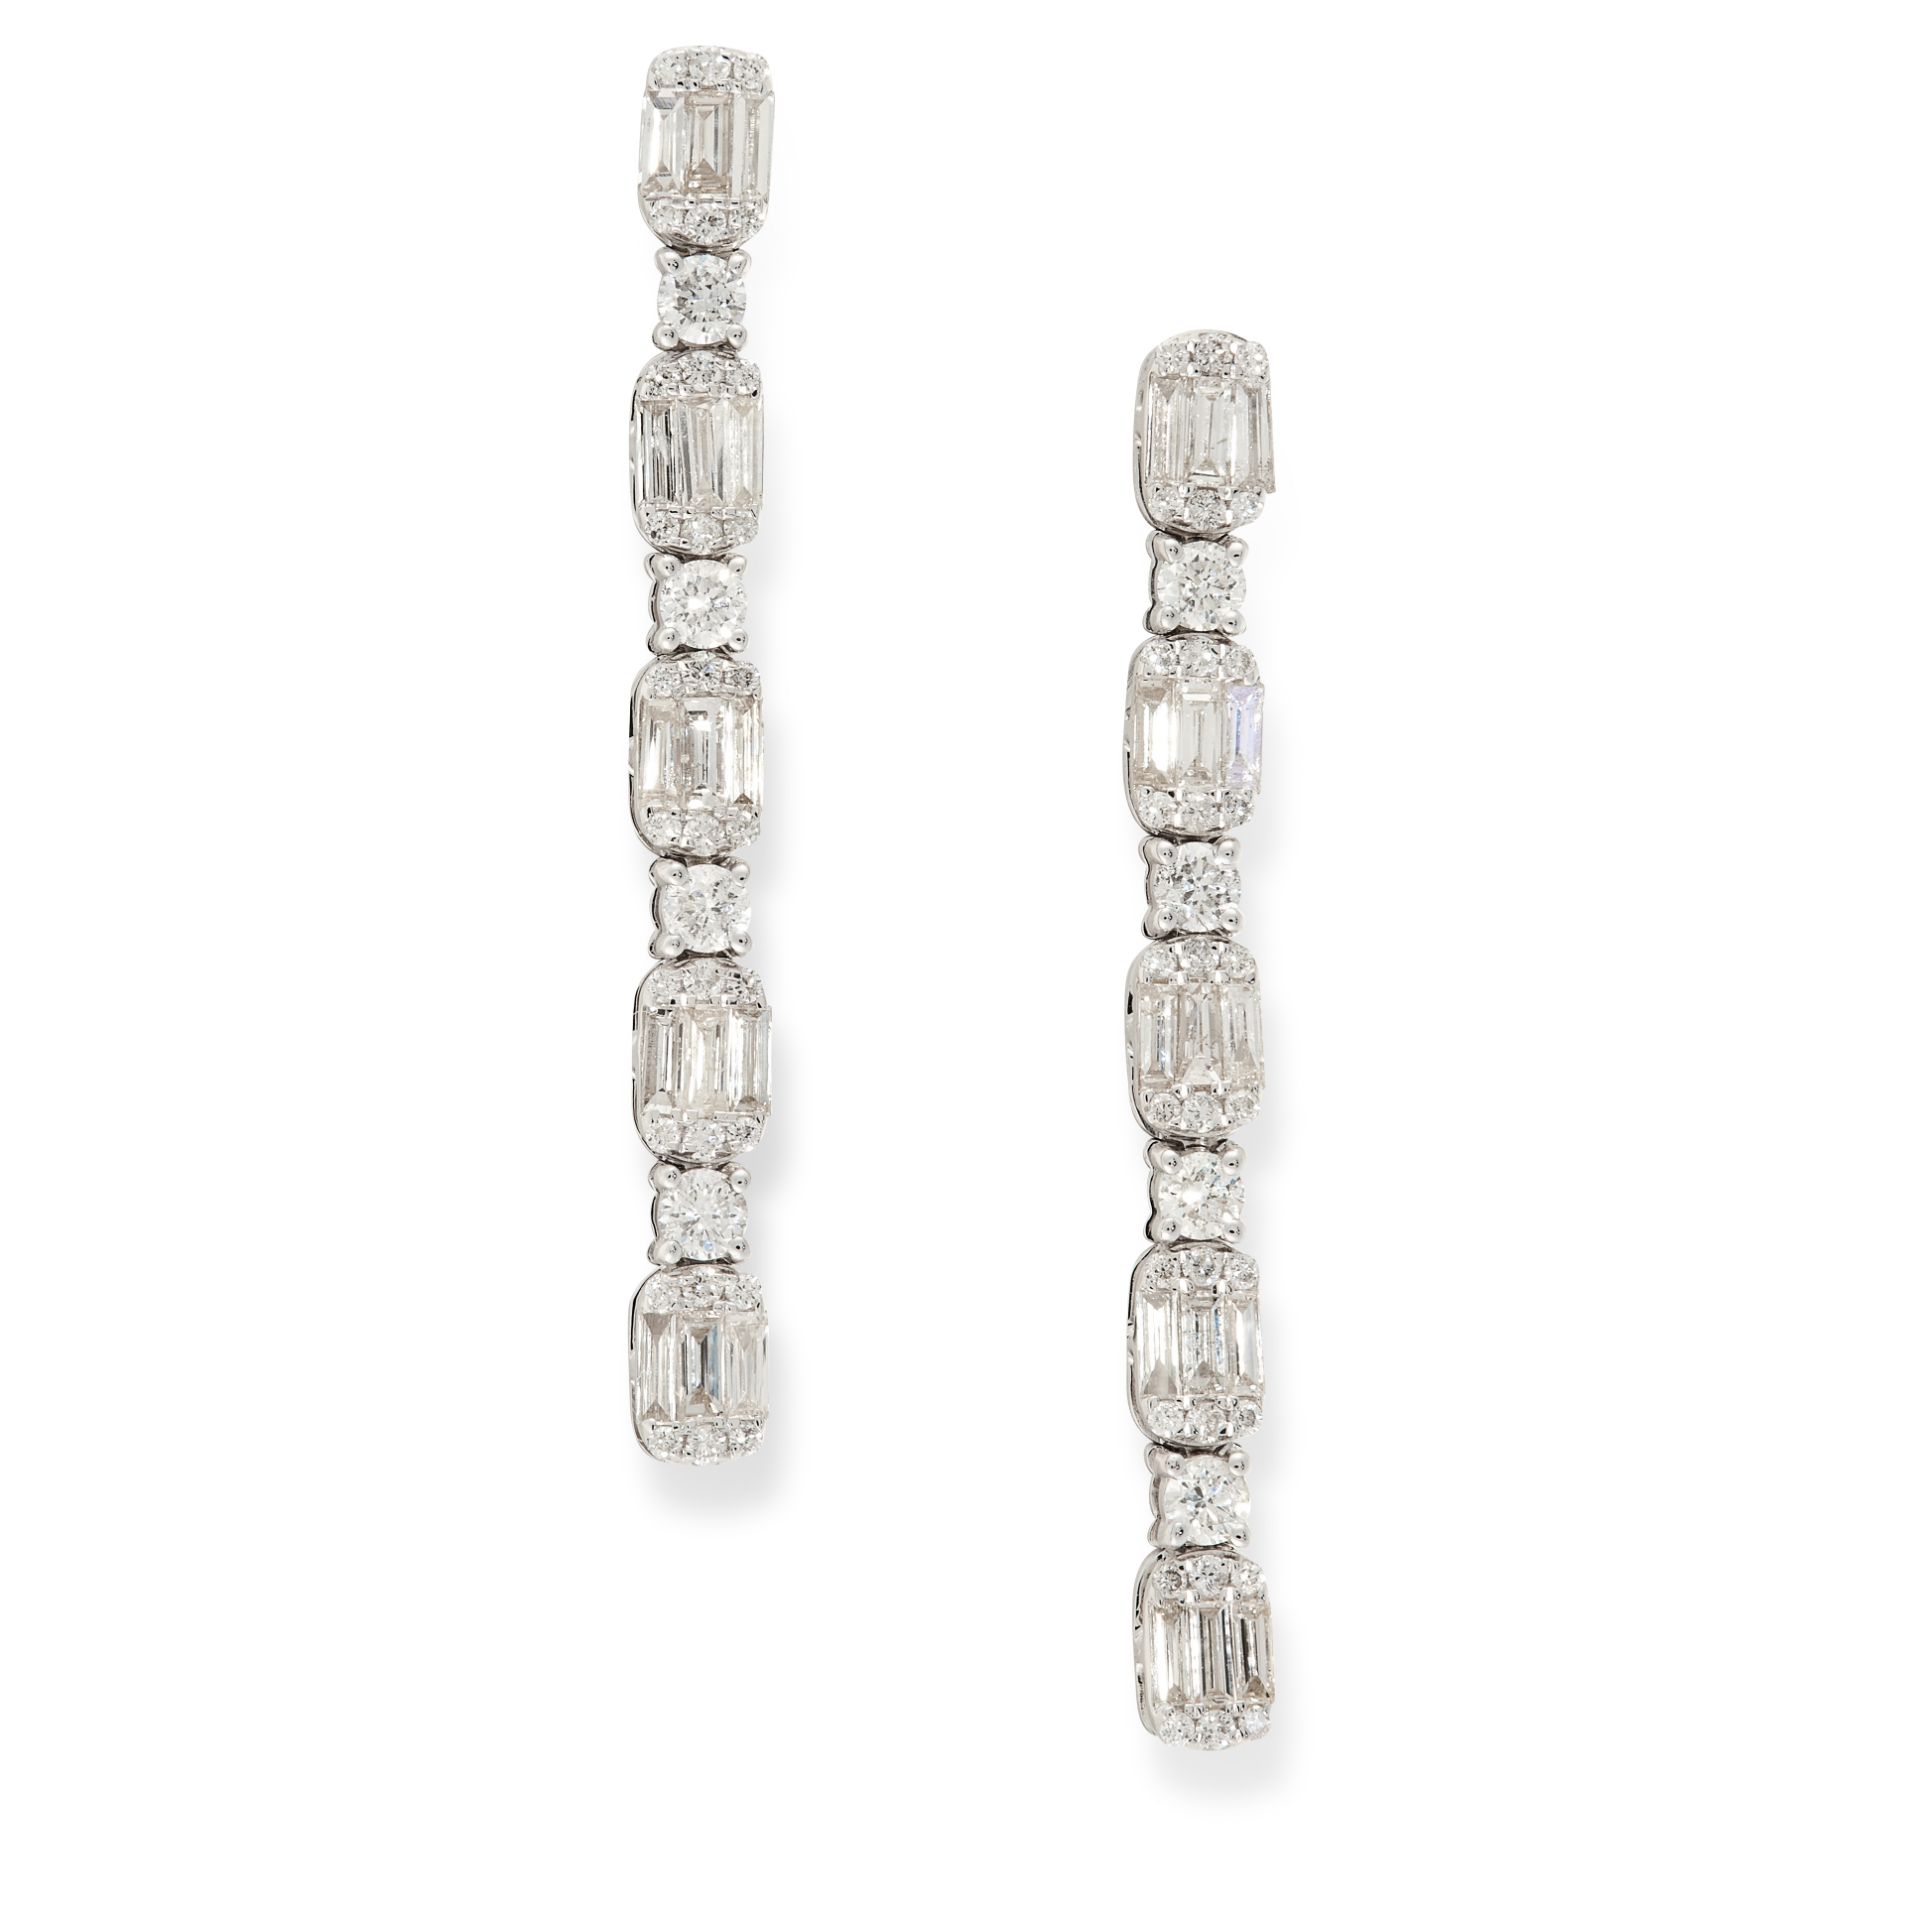 A PAIR OF DIAMOND DROP EARRINGS 18ct in white gold, in drop design, comprising of alternating